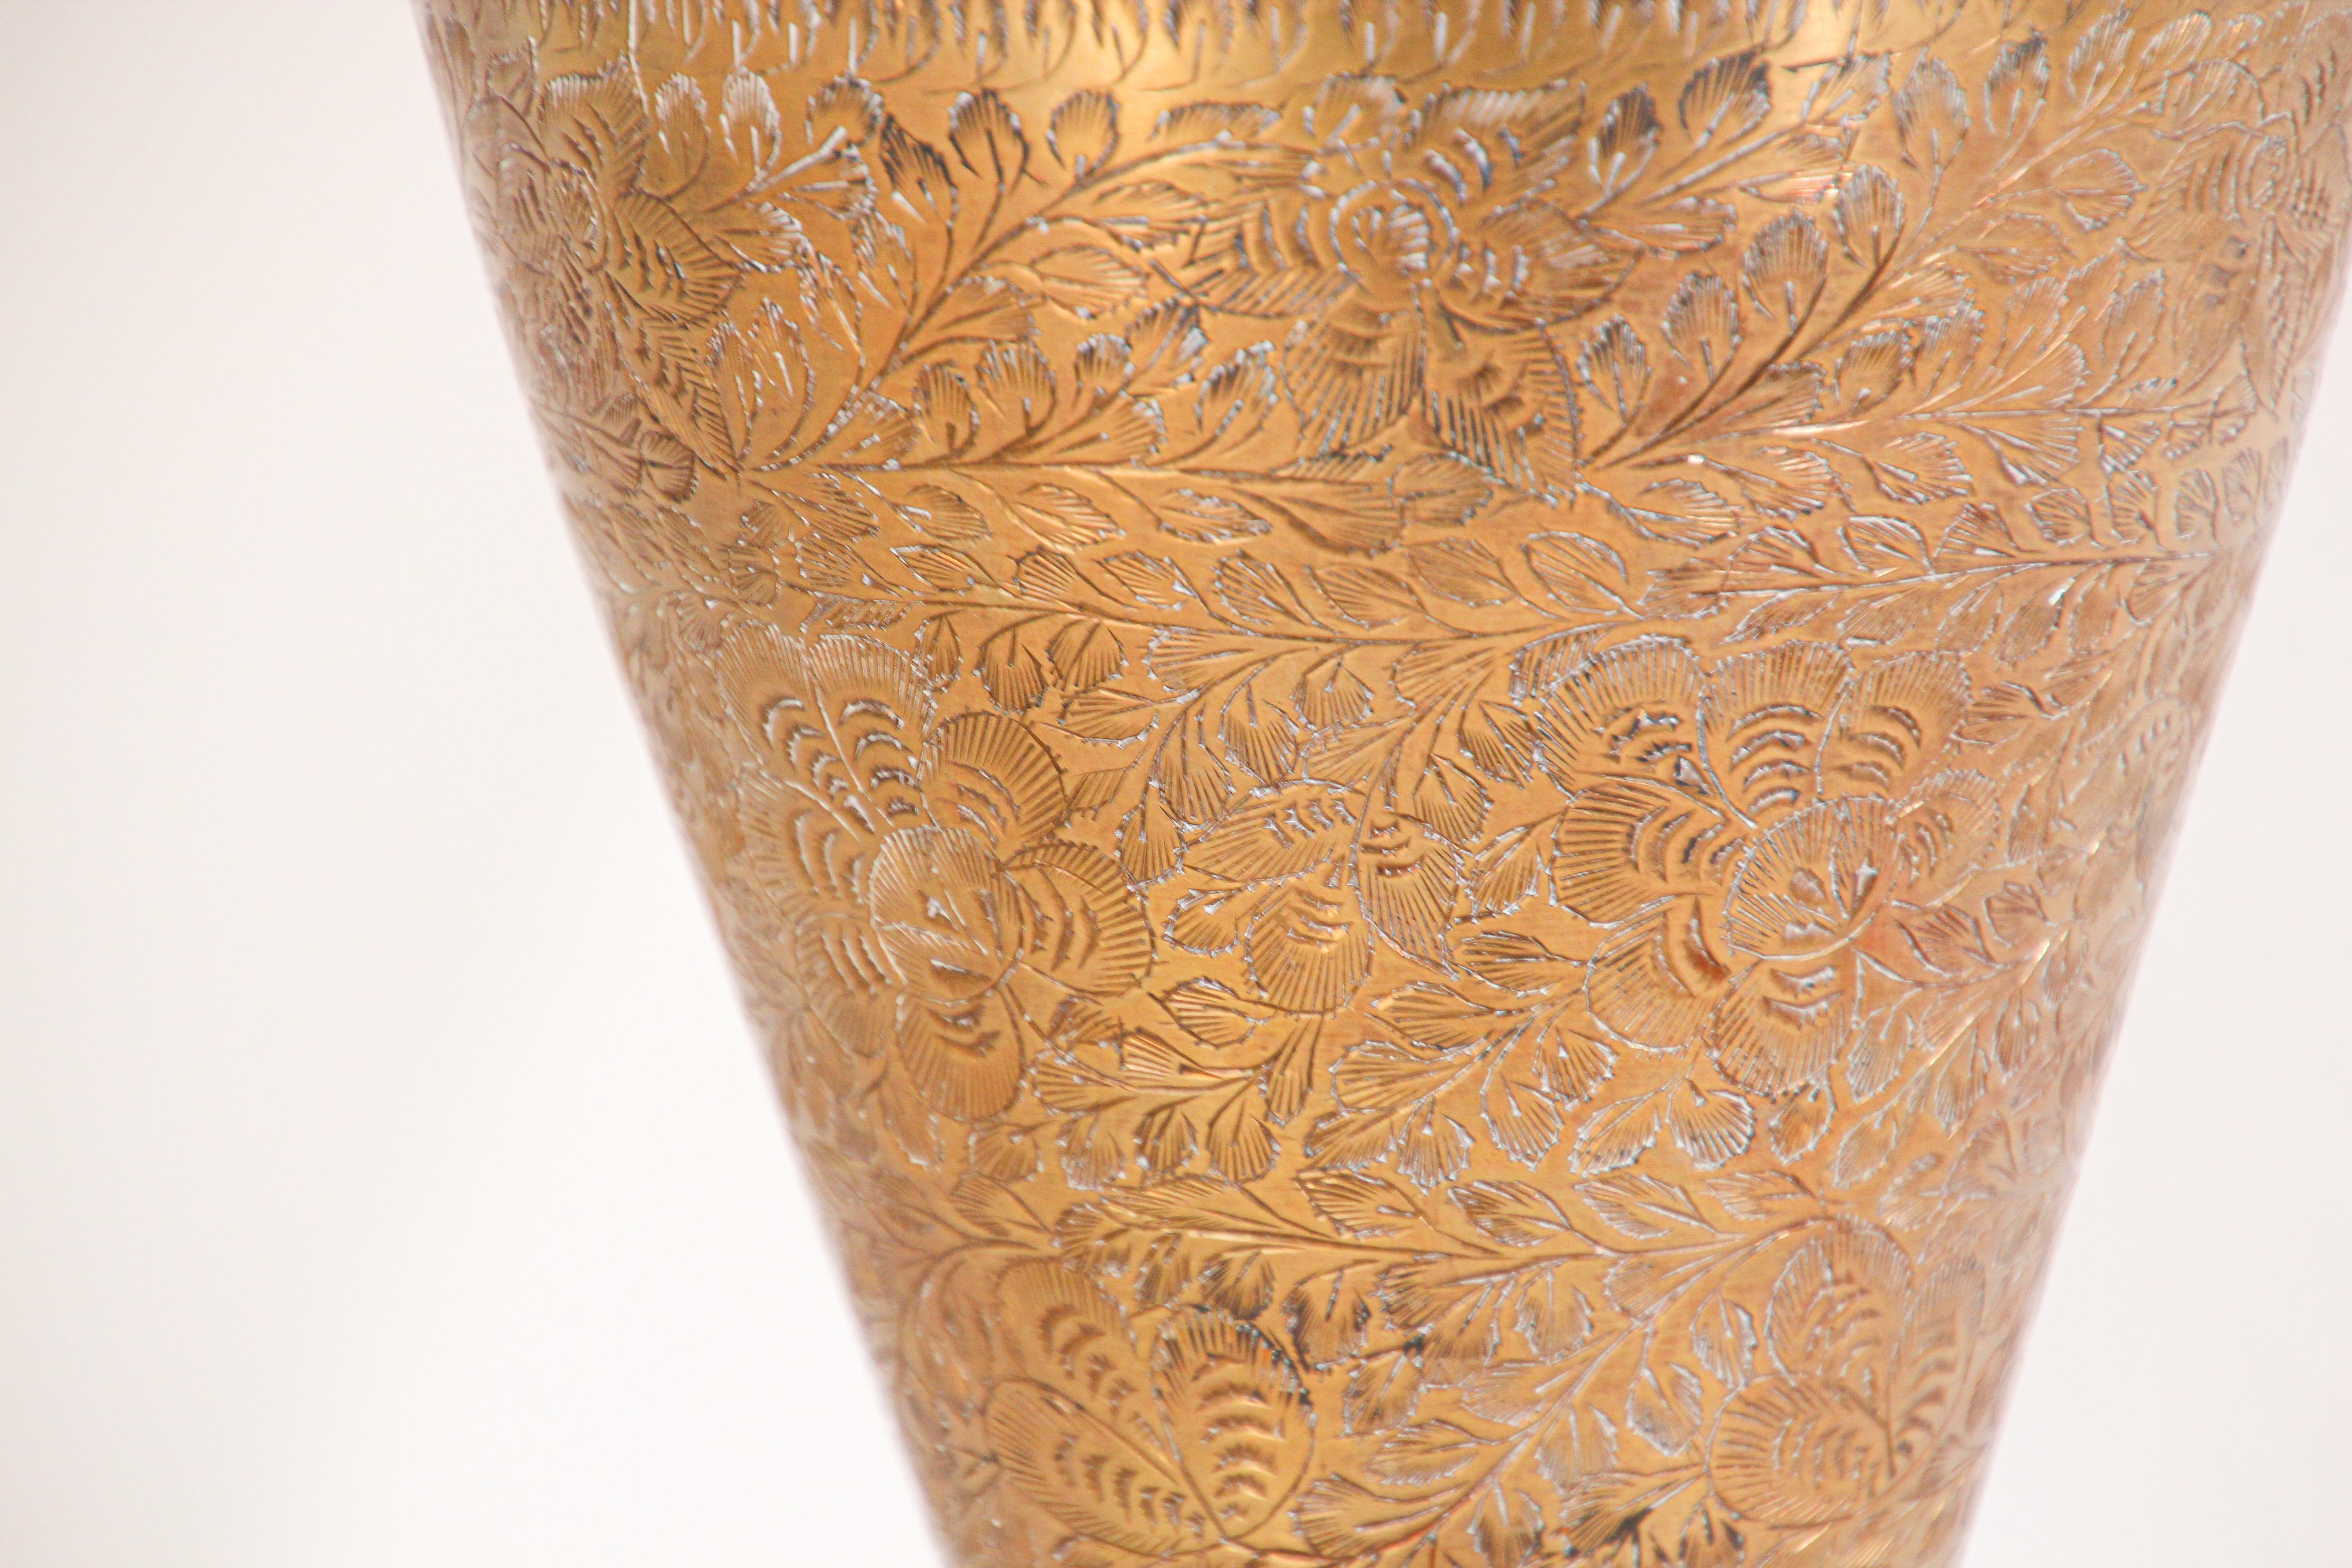 20th Century Vintage Solid Brass Vase from India